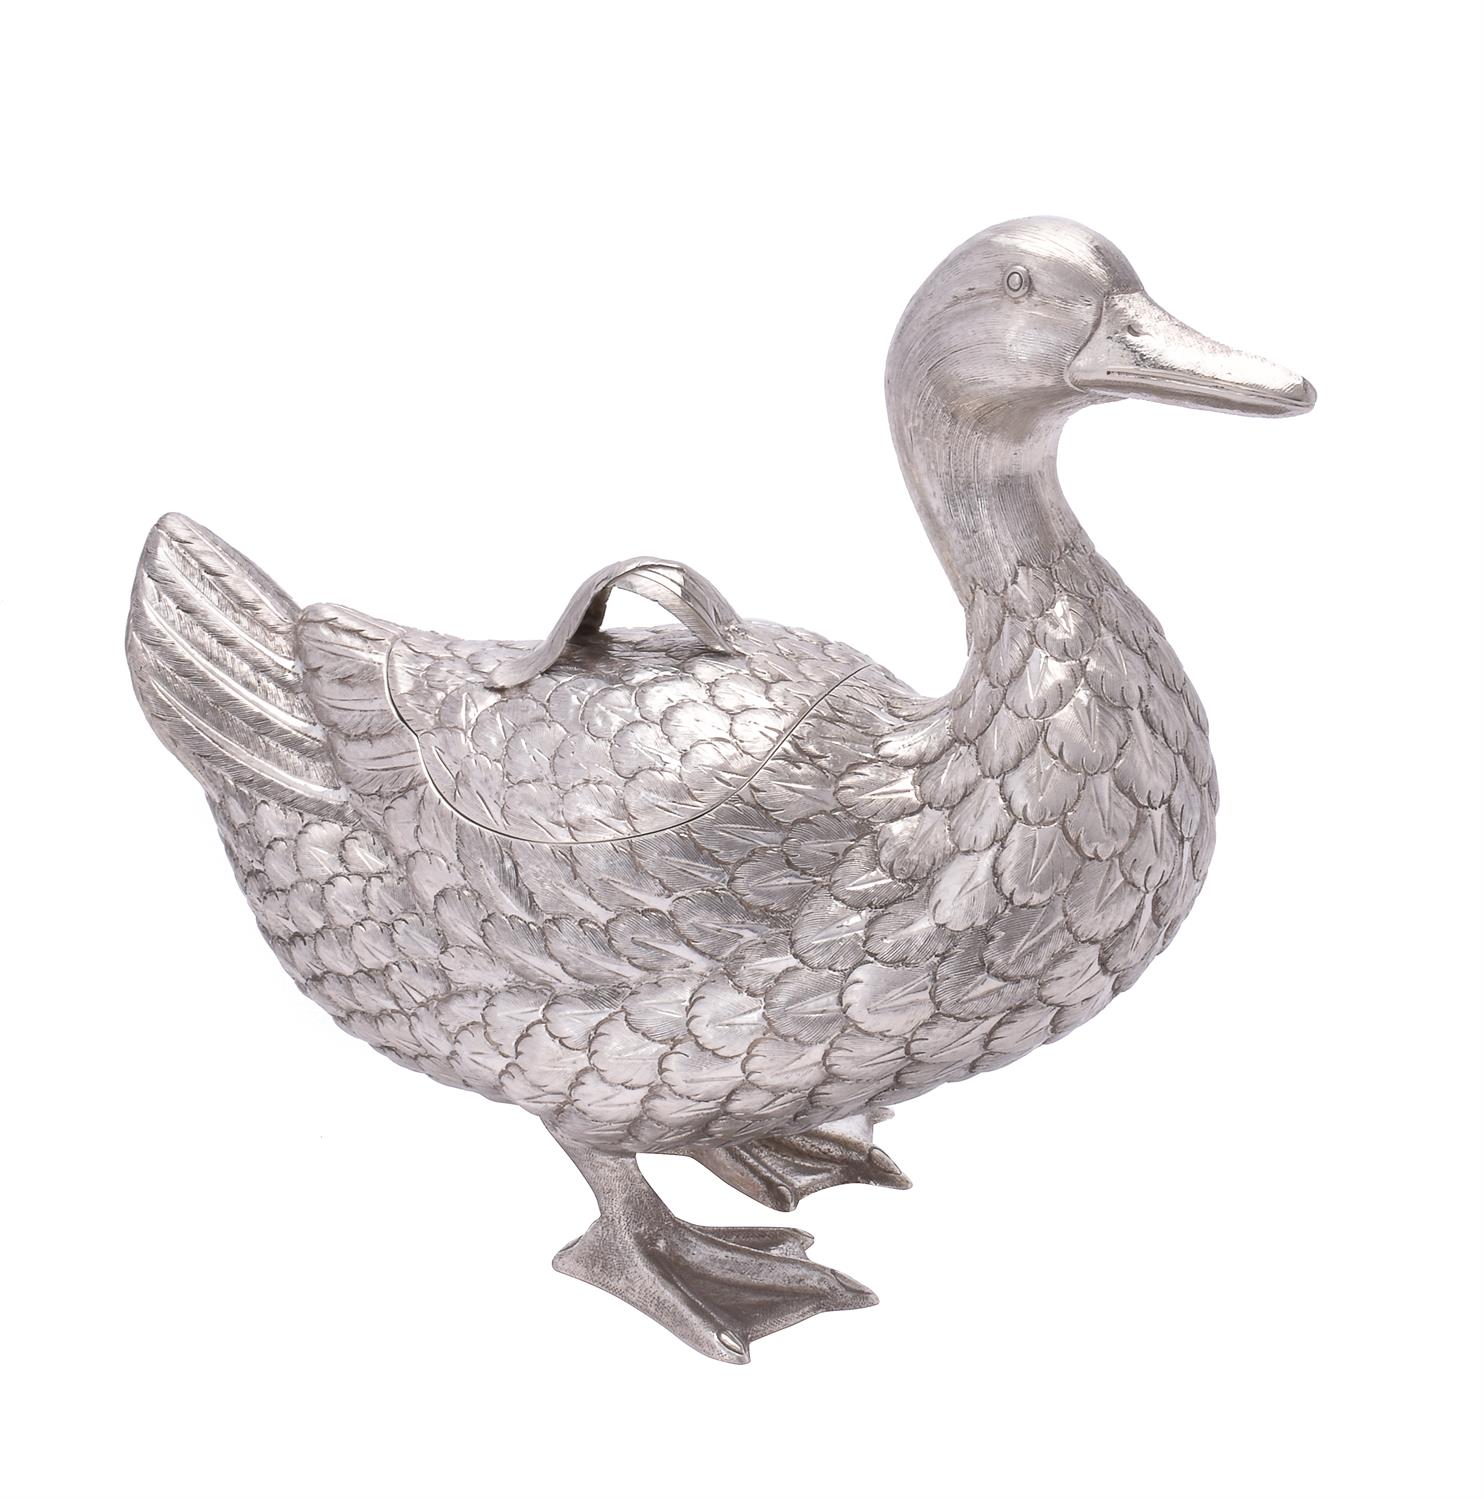 A Portuguese silver coloured novelty large duck tureen or box